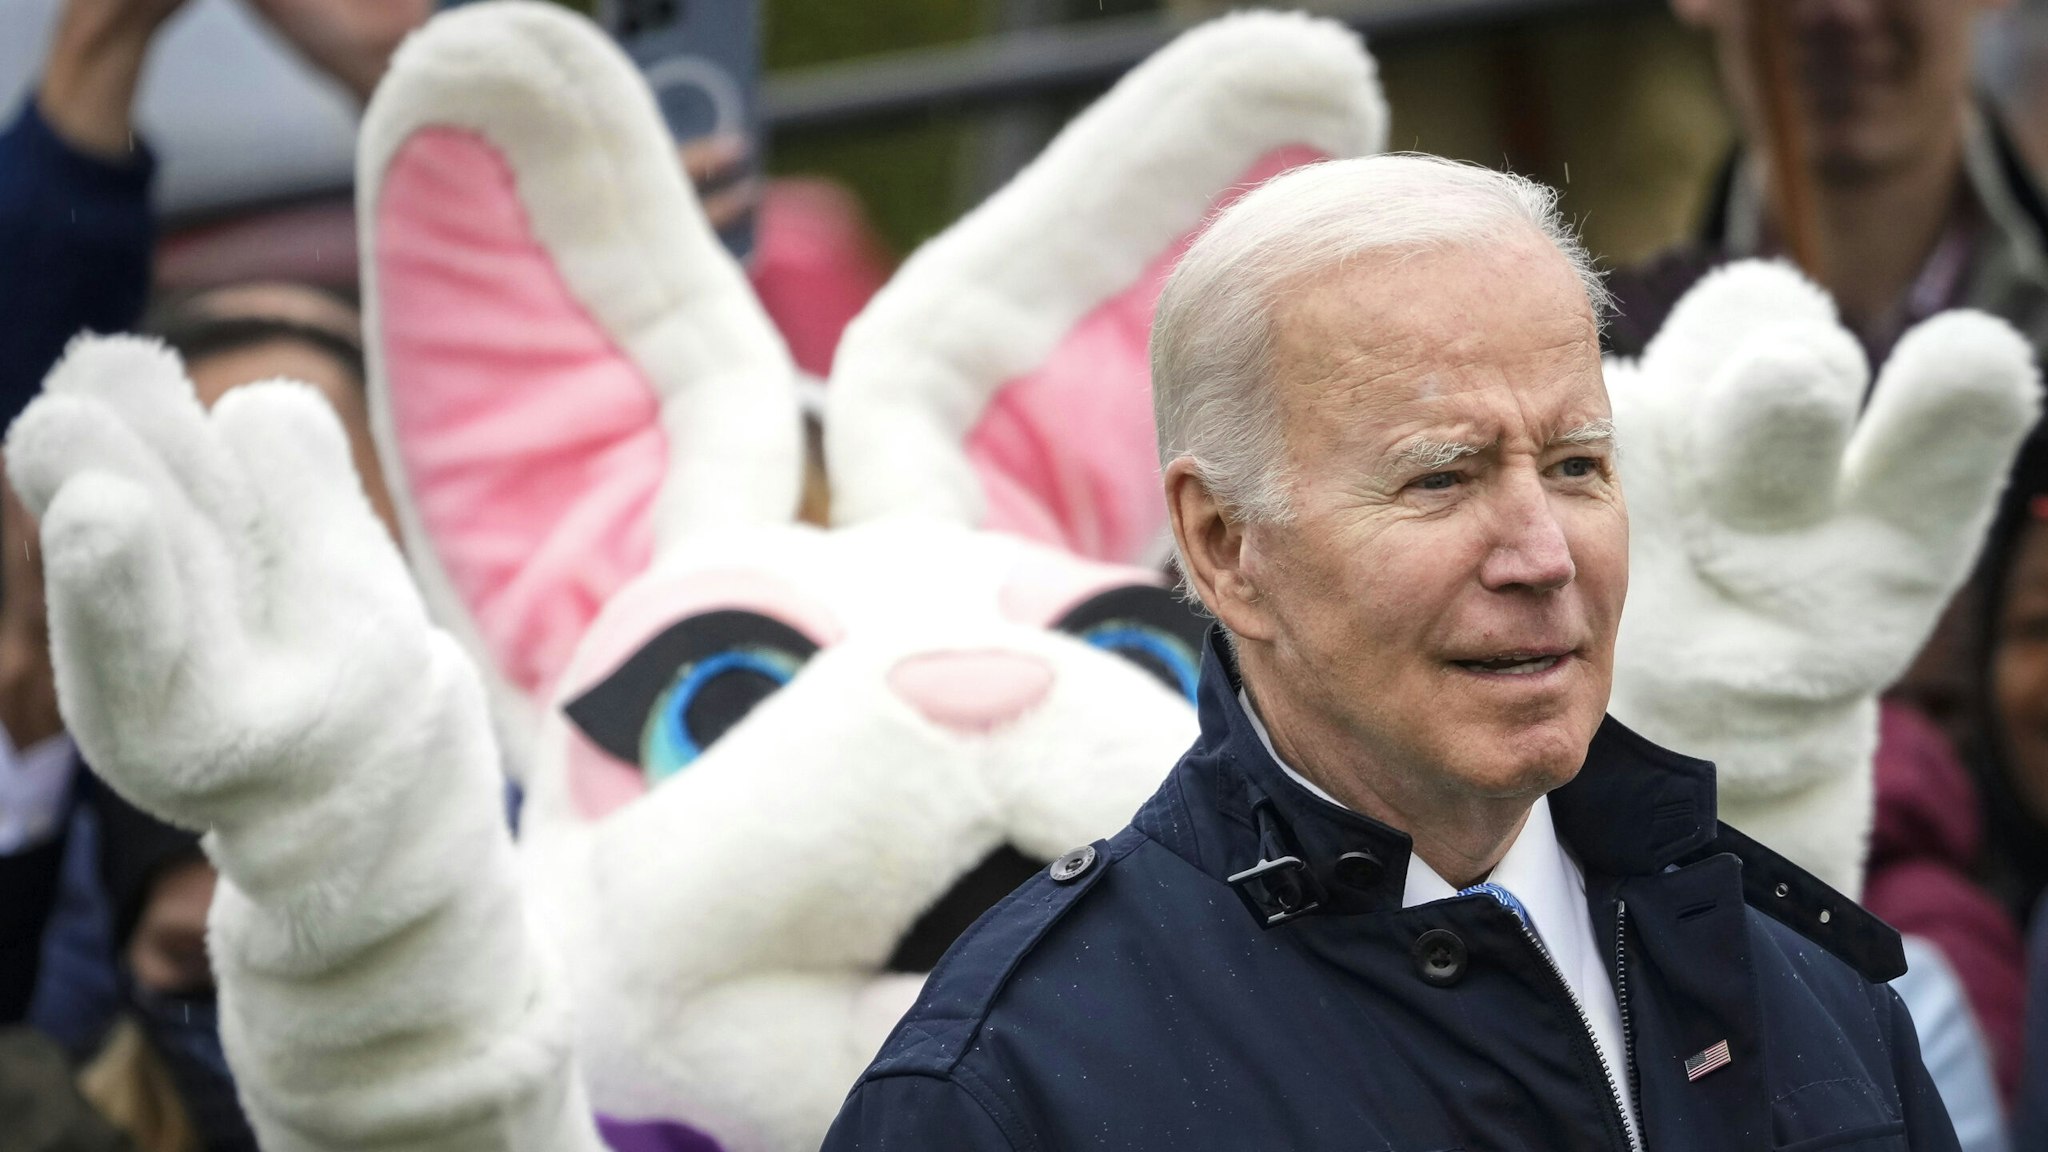 WASHINGTON, DC - APRIL 18: U.S. President Joe Biden attends the Easter Egg Roll on the South Lawn of the White House on April 18, 2022 in Washington, DC. The Easter Egg Roll tradition returns this year after being cancelled in 2020 and 2021 due to the COVID-19 pandemic.